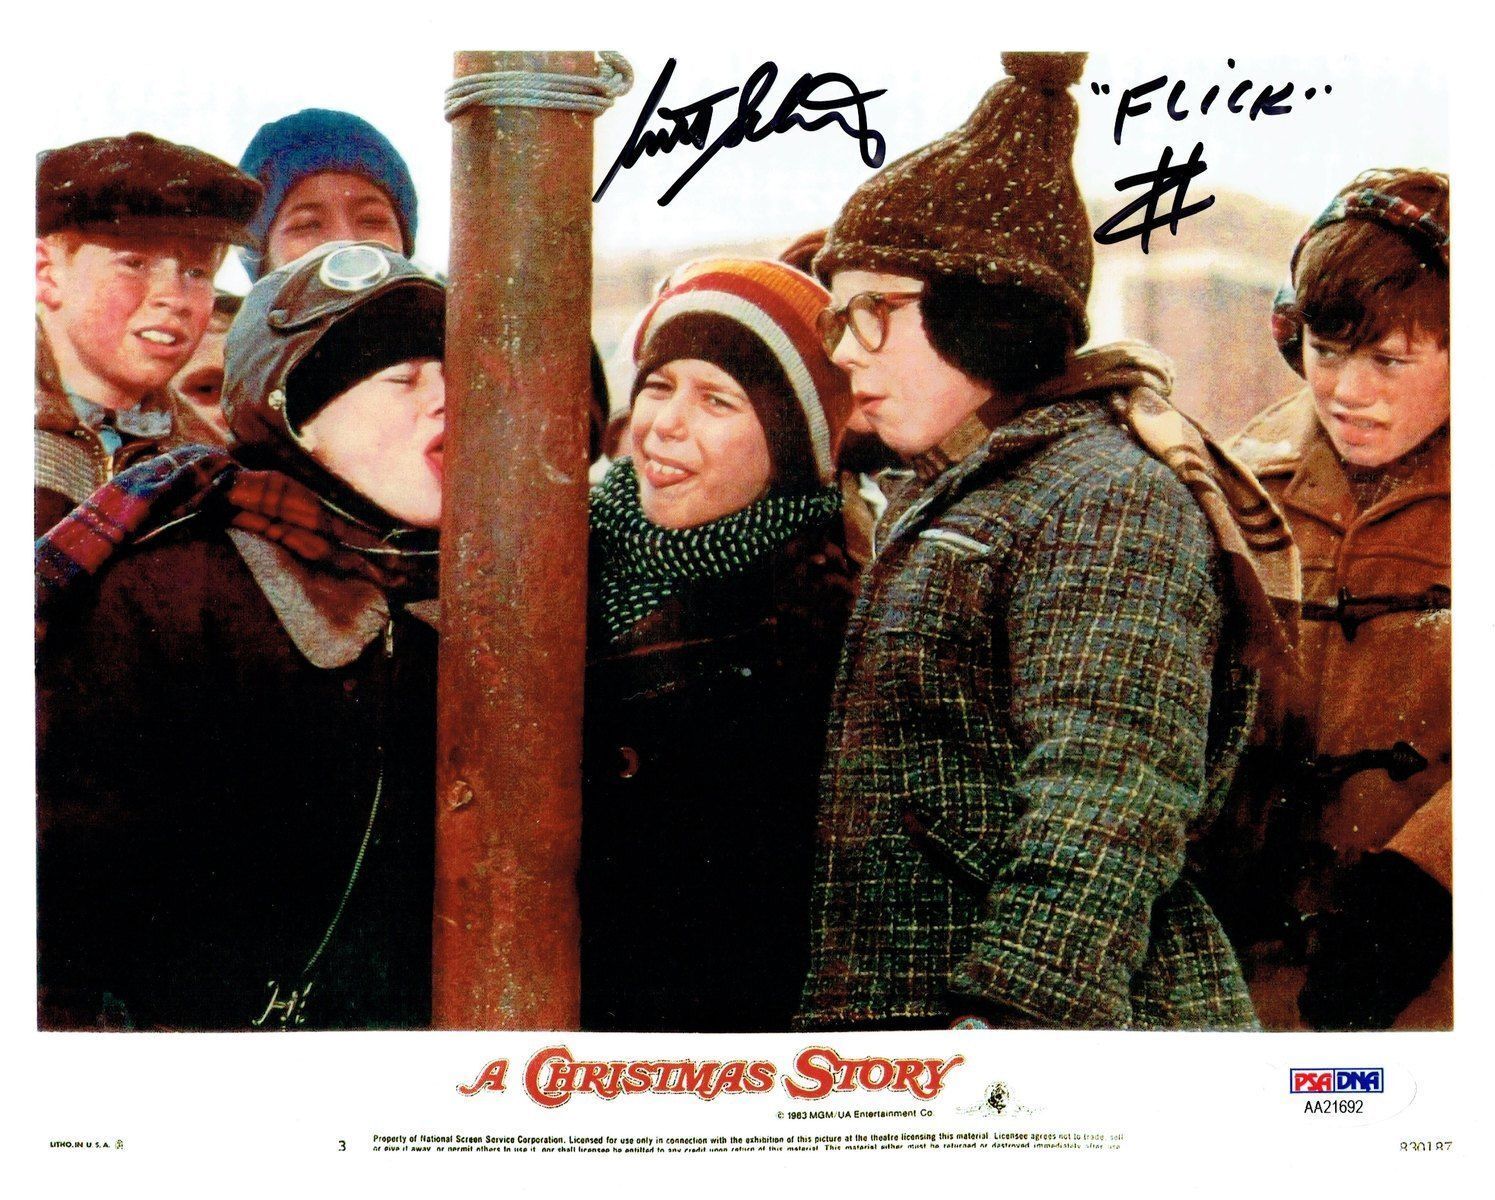 Scotty Schwartz Signed A Christmas Story Autographed 8x10 Photo Poster painting PSA/DNA #2